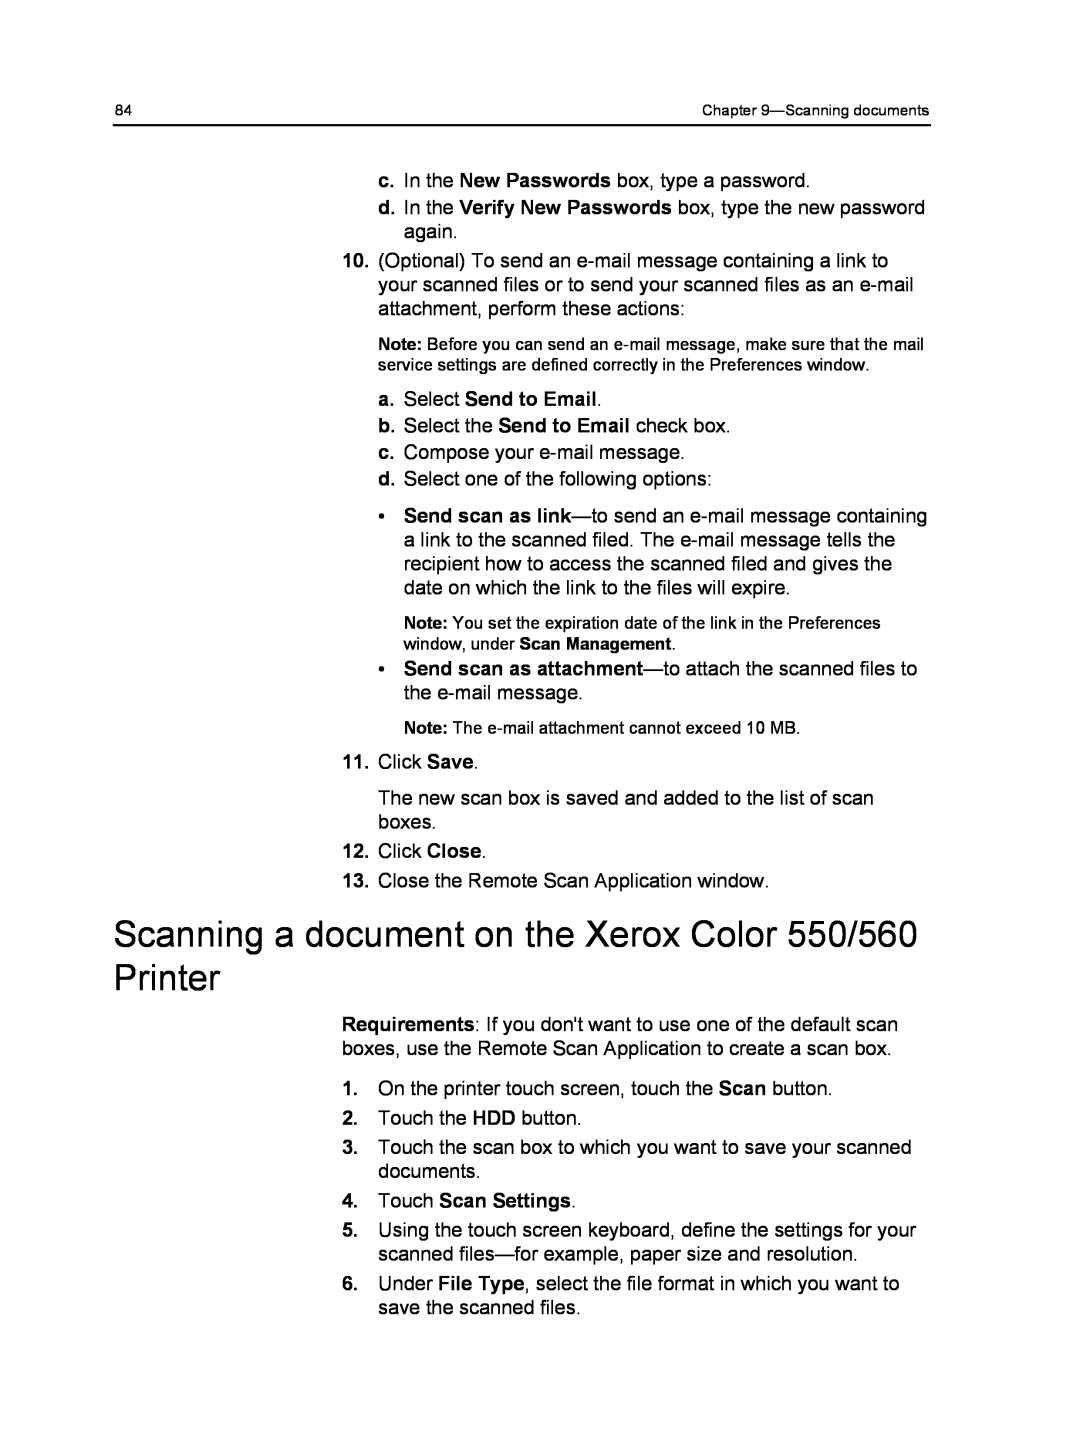 Xerox 560, 550 manual a.Select Send to Email, Touch Scan Settings 